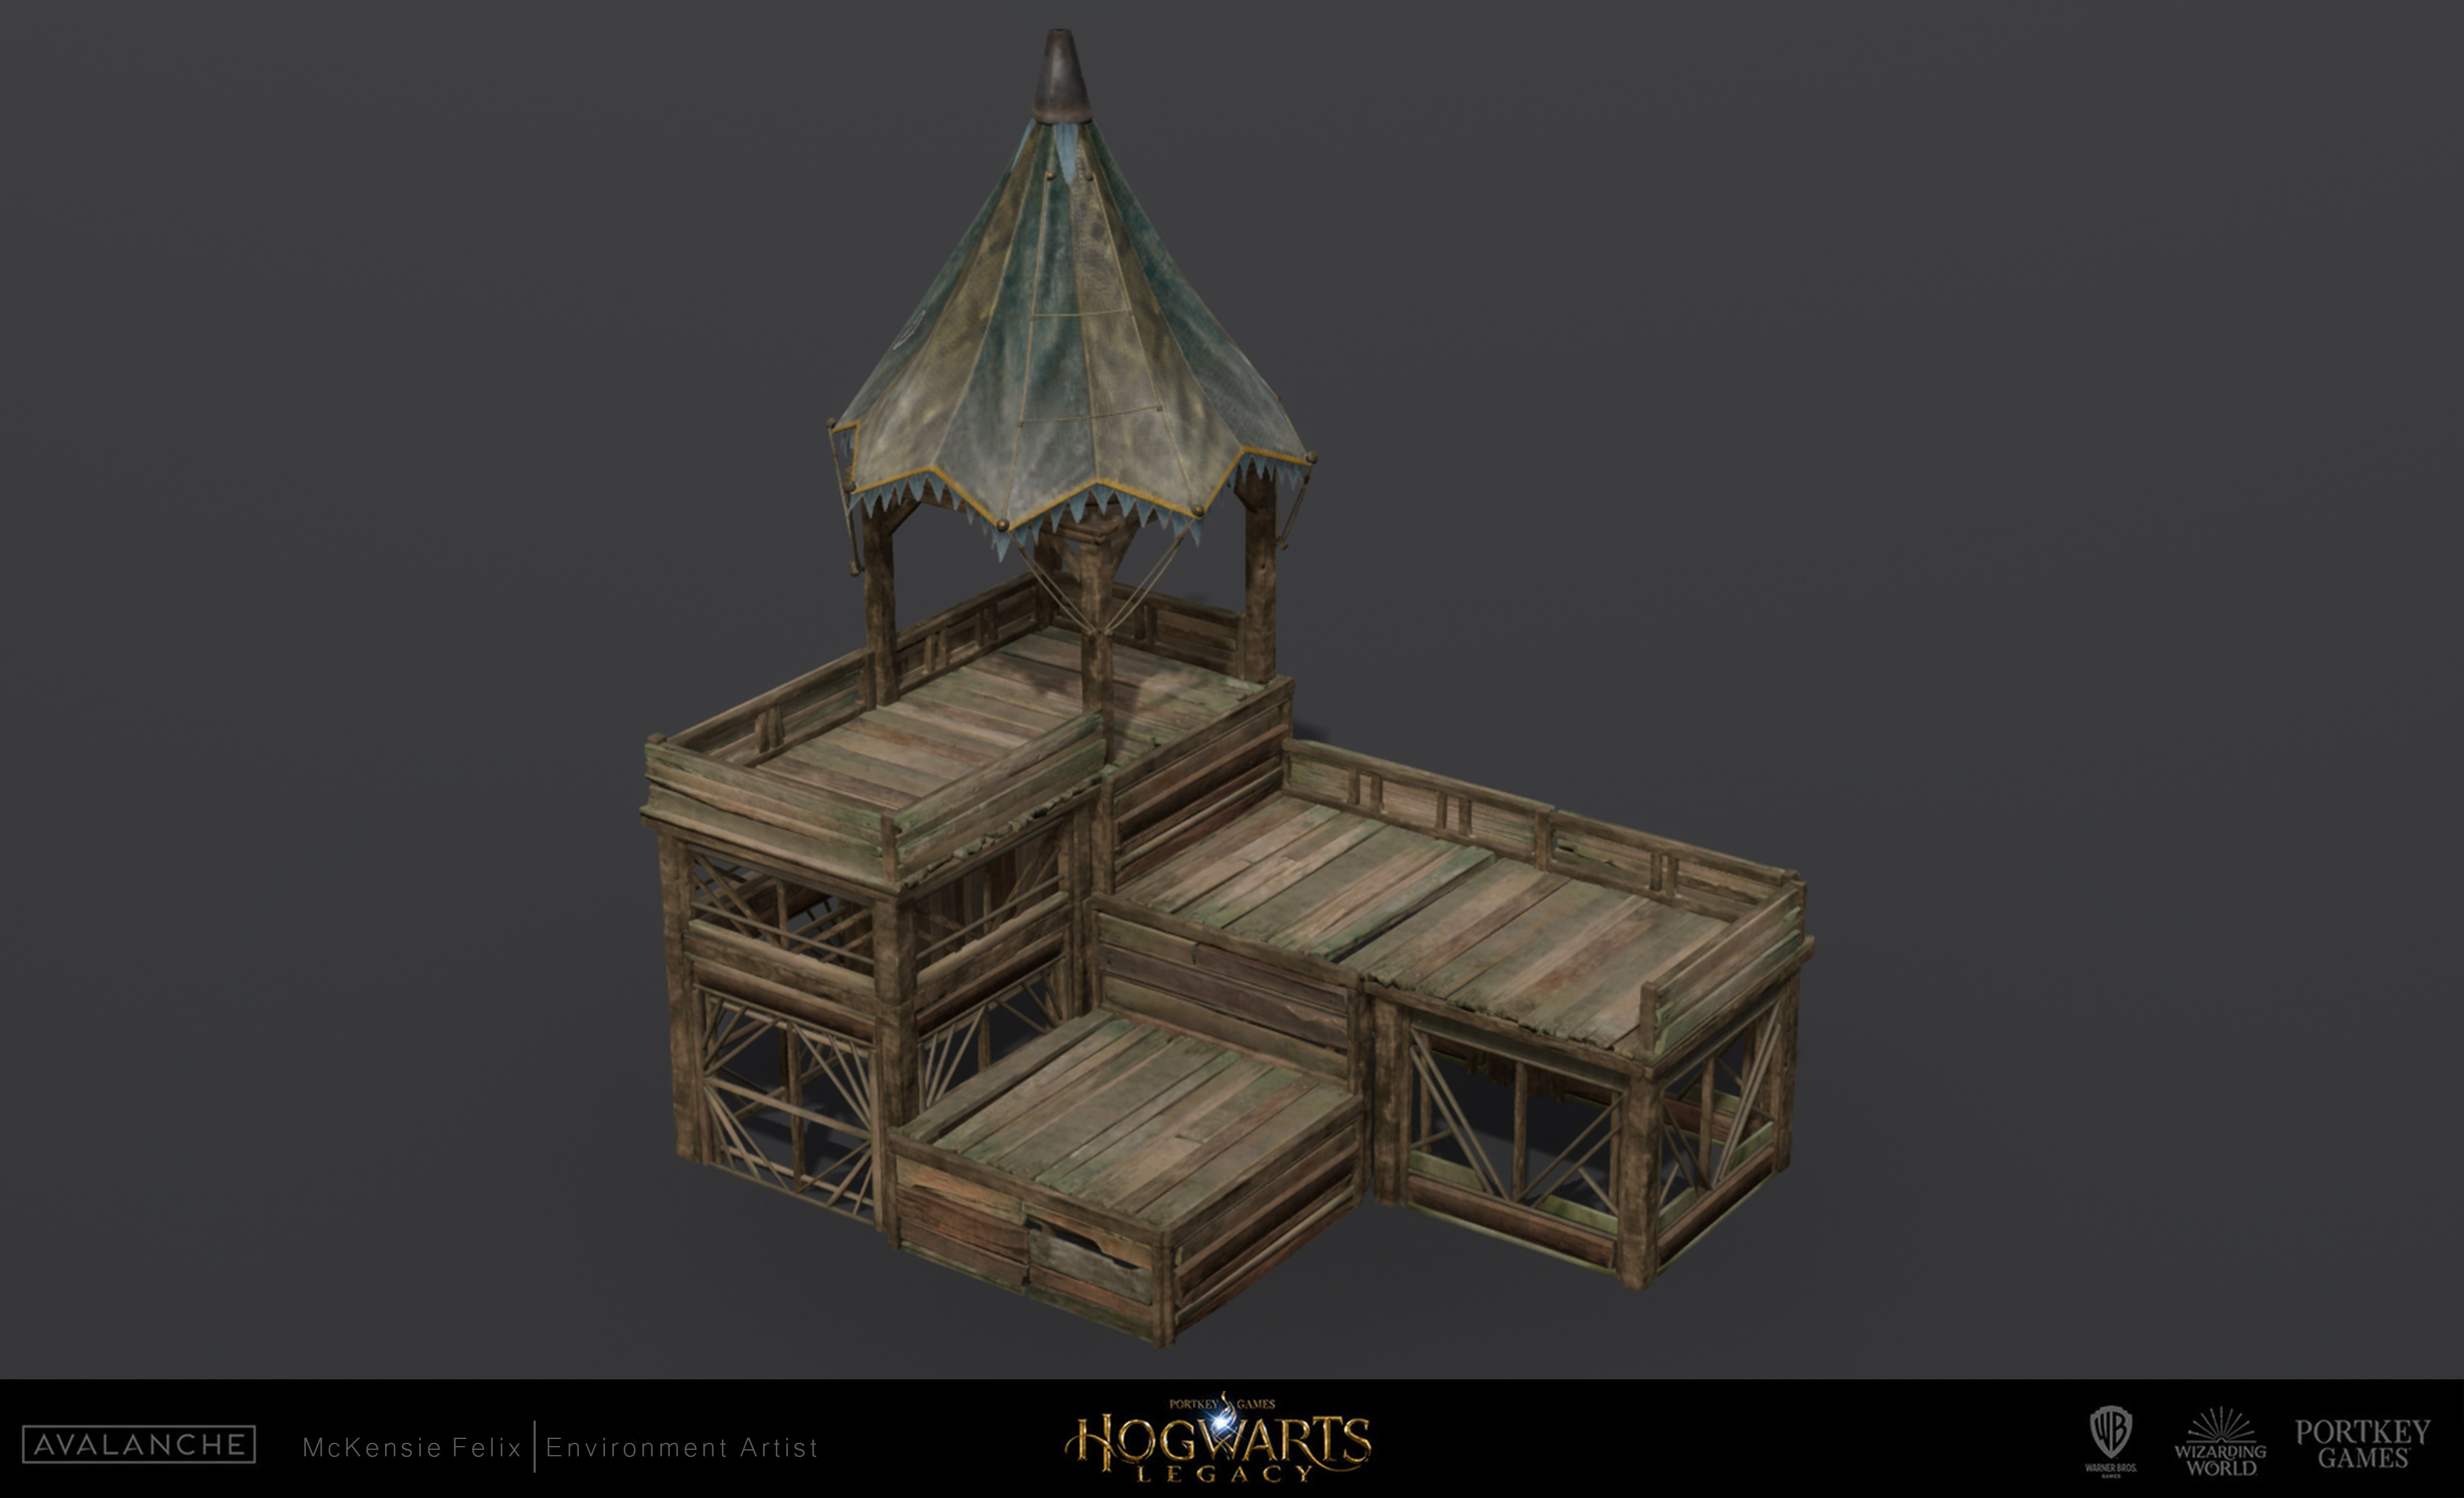 Worked with our level designers to create kit pieces for a blueprint to build wooden camp structures.
This is an example of how all of the pieces fit together for assembly. Tent on top made by outsourcing artists. Thief wood surfacing by Jeremy Wood.